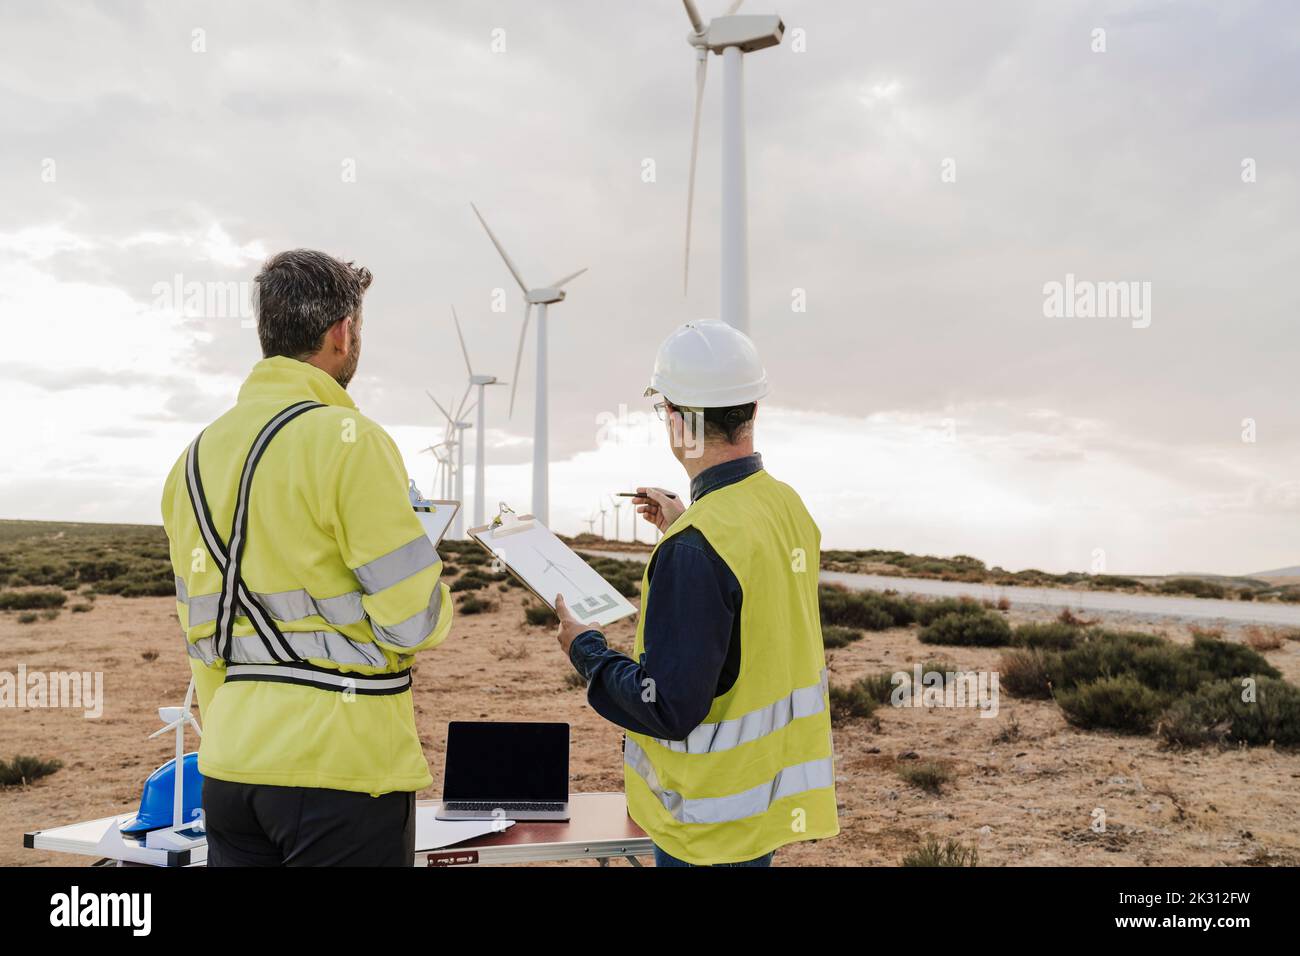 Engineer discussing with colleague looking at wind turbines at wind farm Stock Photo